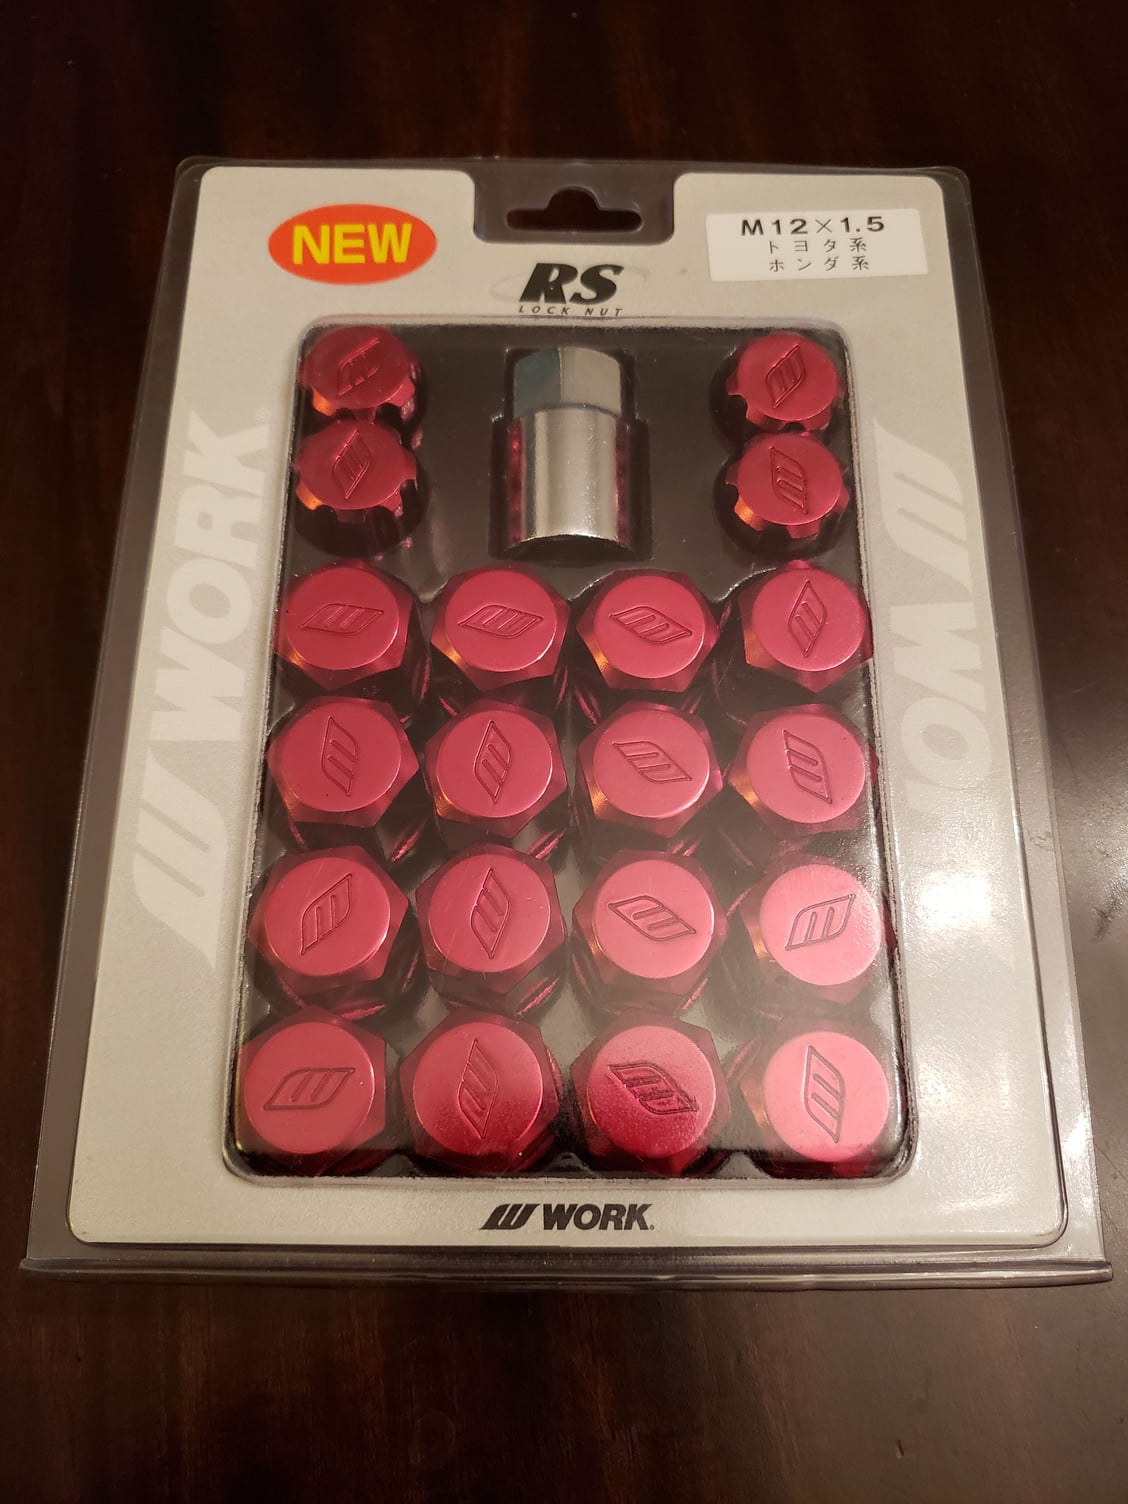 Wheels and Tires/Axles - WORK Wheels RS Type Forged Aluminum Lock Lug Nuts M12 X 1.5 RED 20 Pcs. - New - San Diego, CA 92078, United States